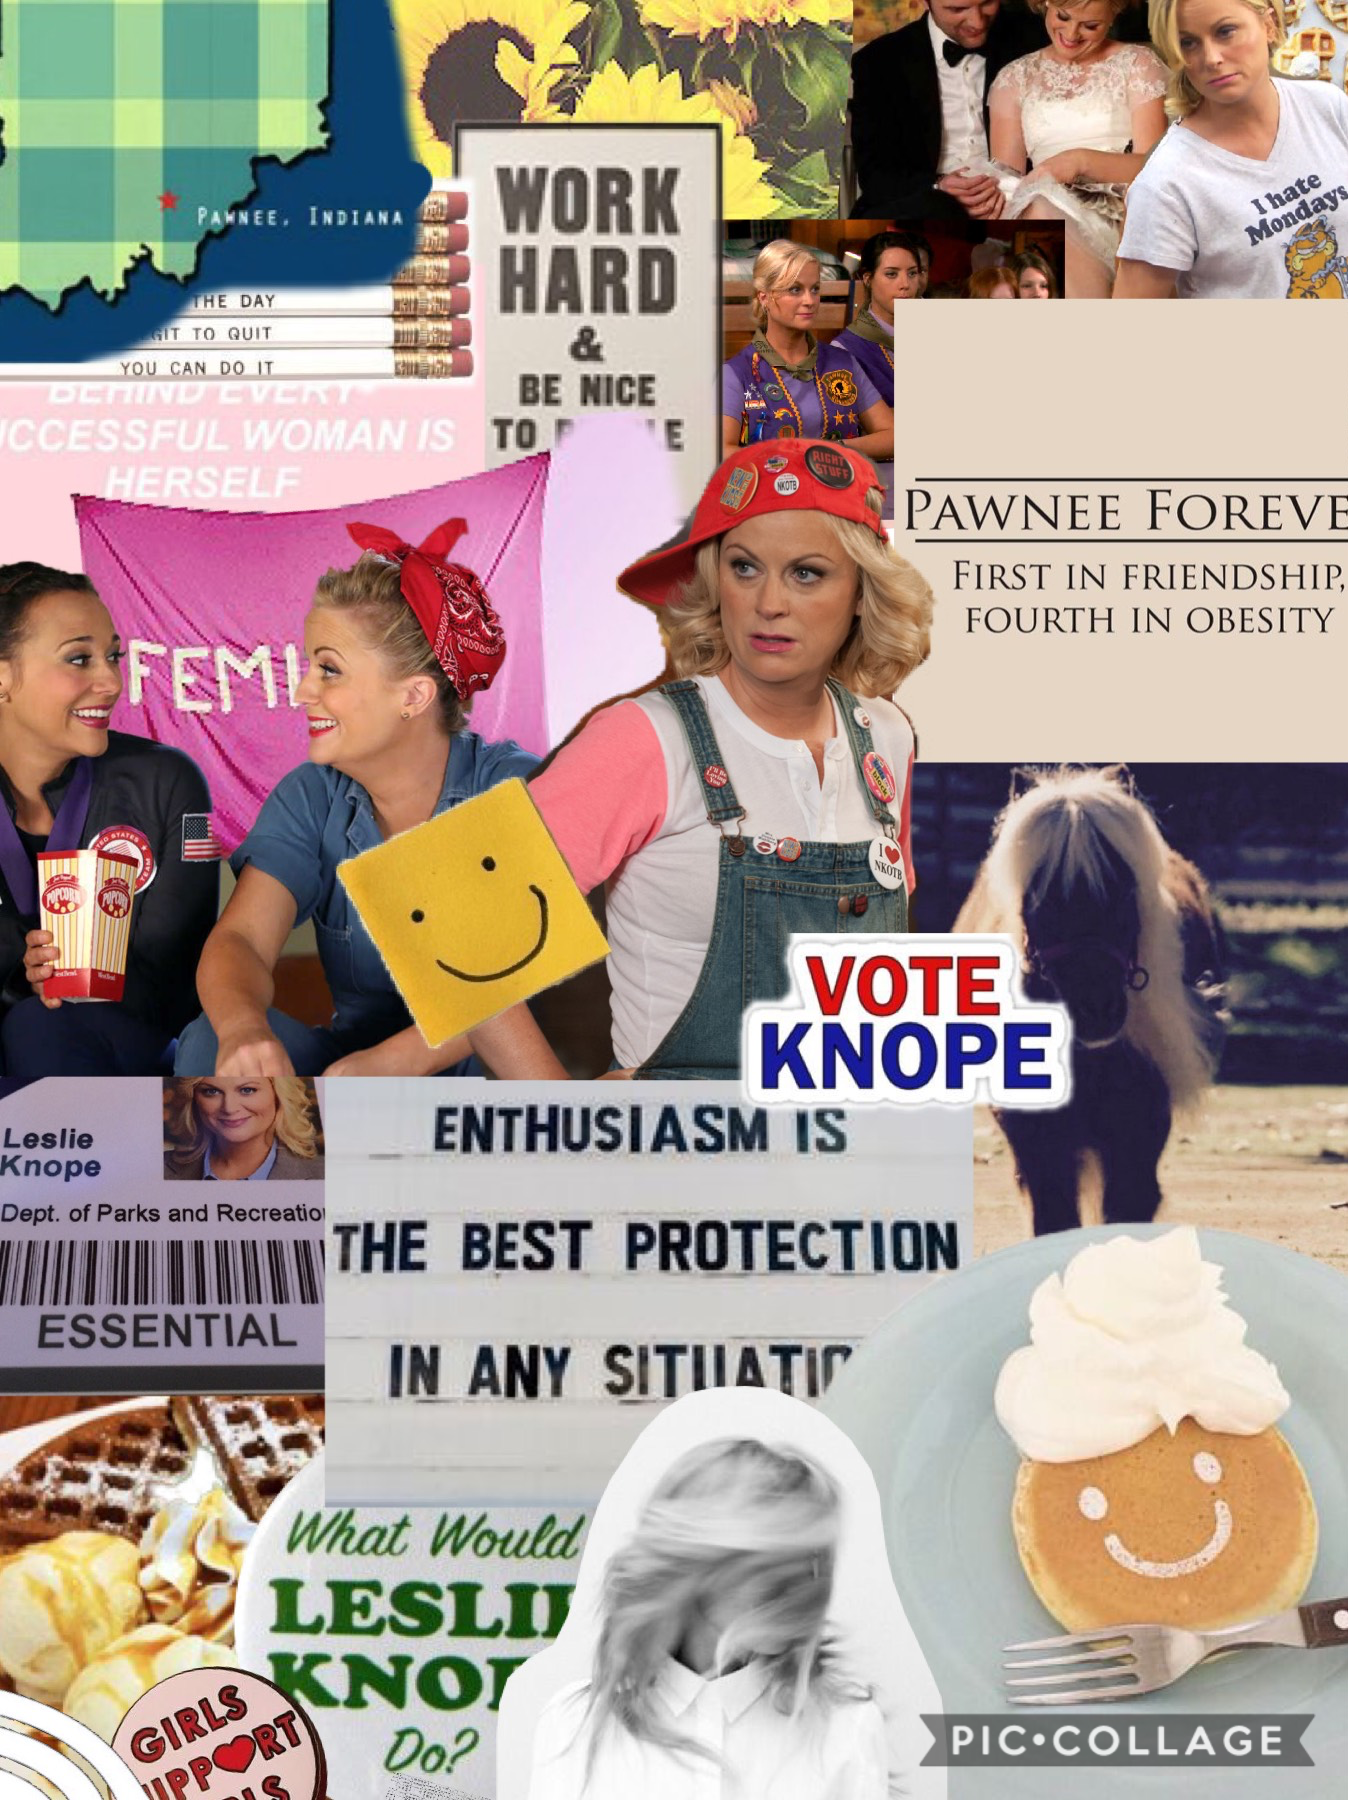 🌟tap!🌟
QOTD: who’s your fav parks and rec character?
AOTD: Leslie Knope!✨